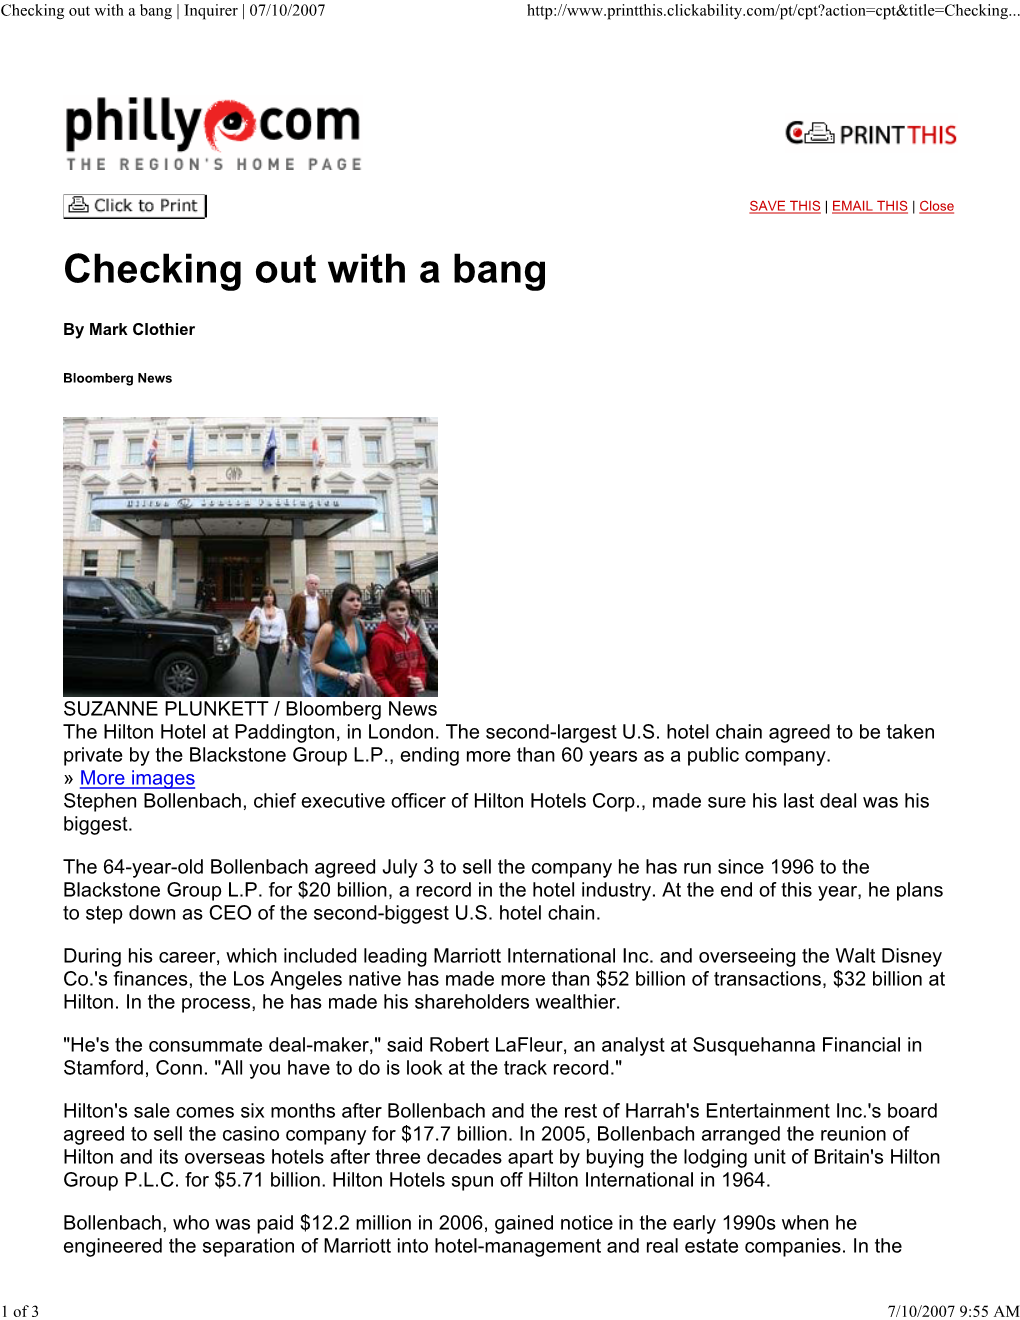 Checking out with a Bang | Inquirer | 07/10/2007